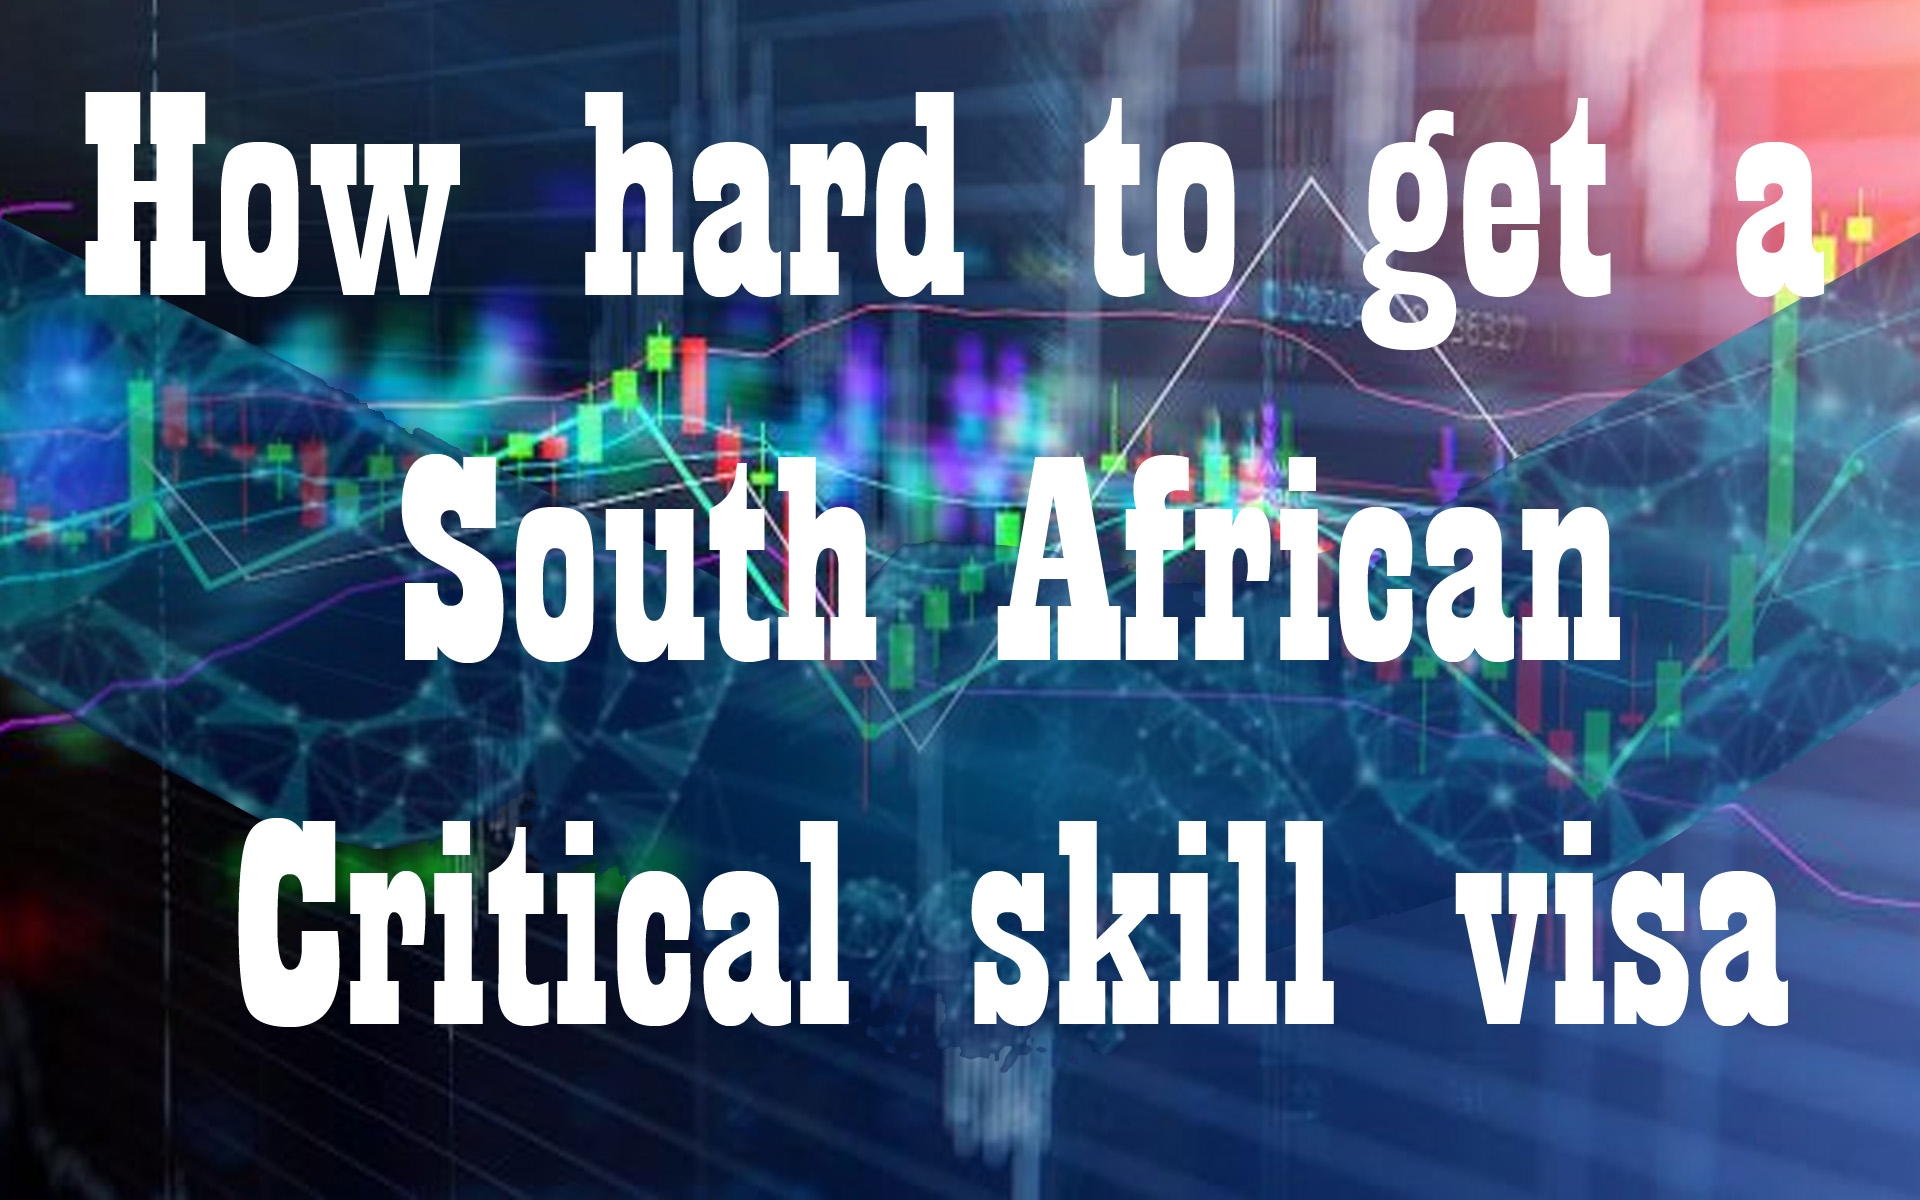 How hard to get a South African Critical skill visa? | Else Visa Experts